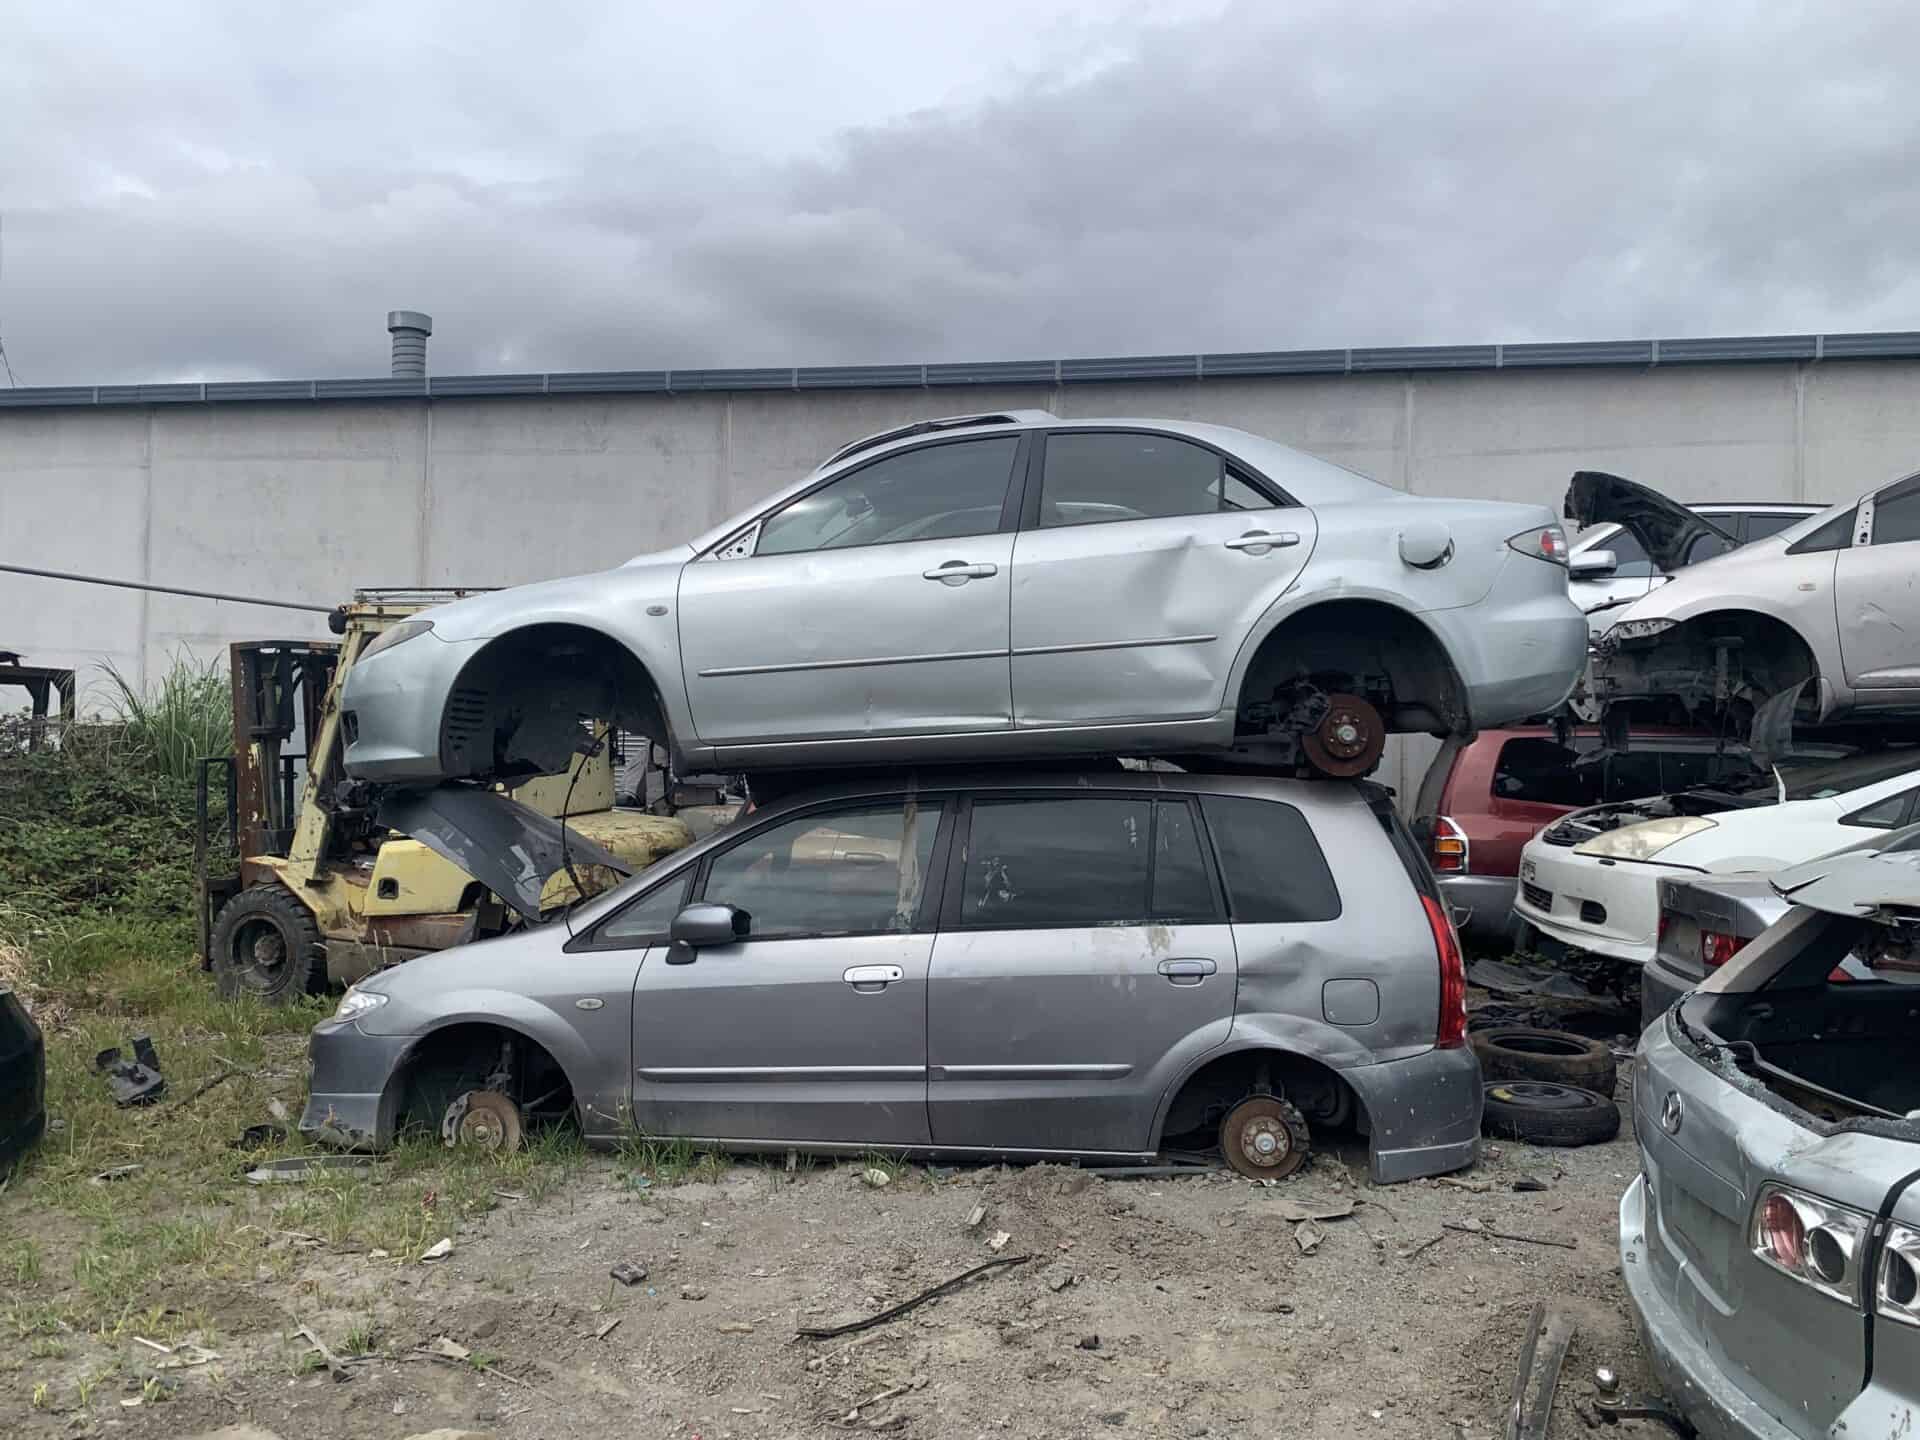 Car Wreckers Auckland: We Buy Dead Vehicles & Sell Parts